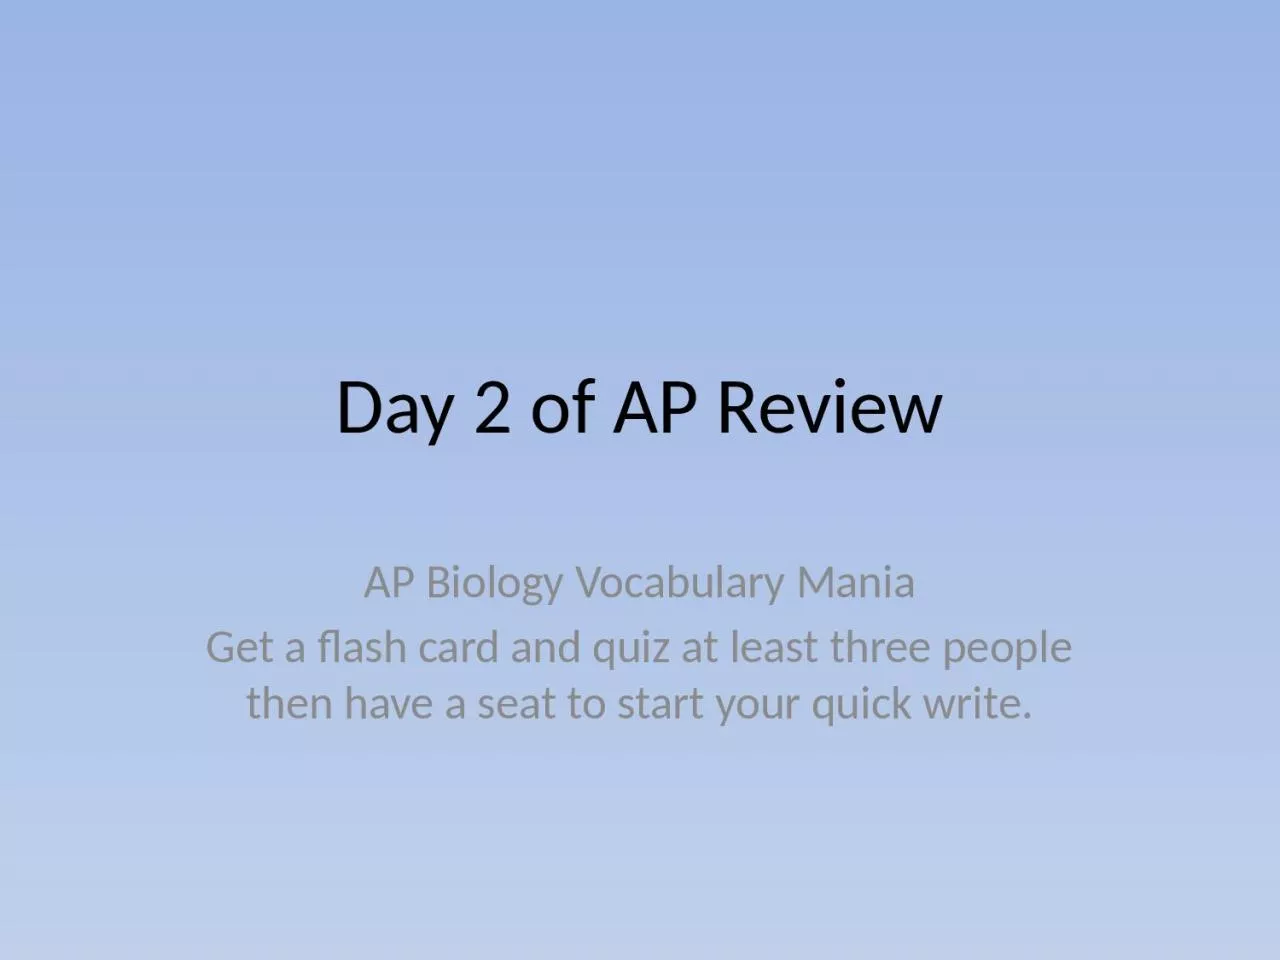 Day 2 of AP Review AP Biology Vocabulary Mania